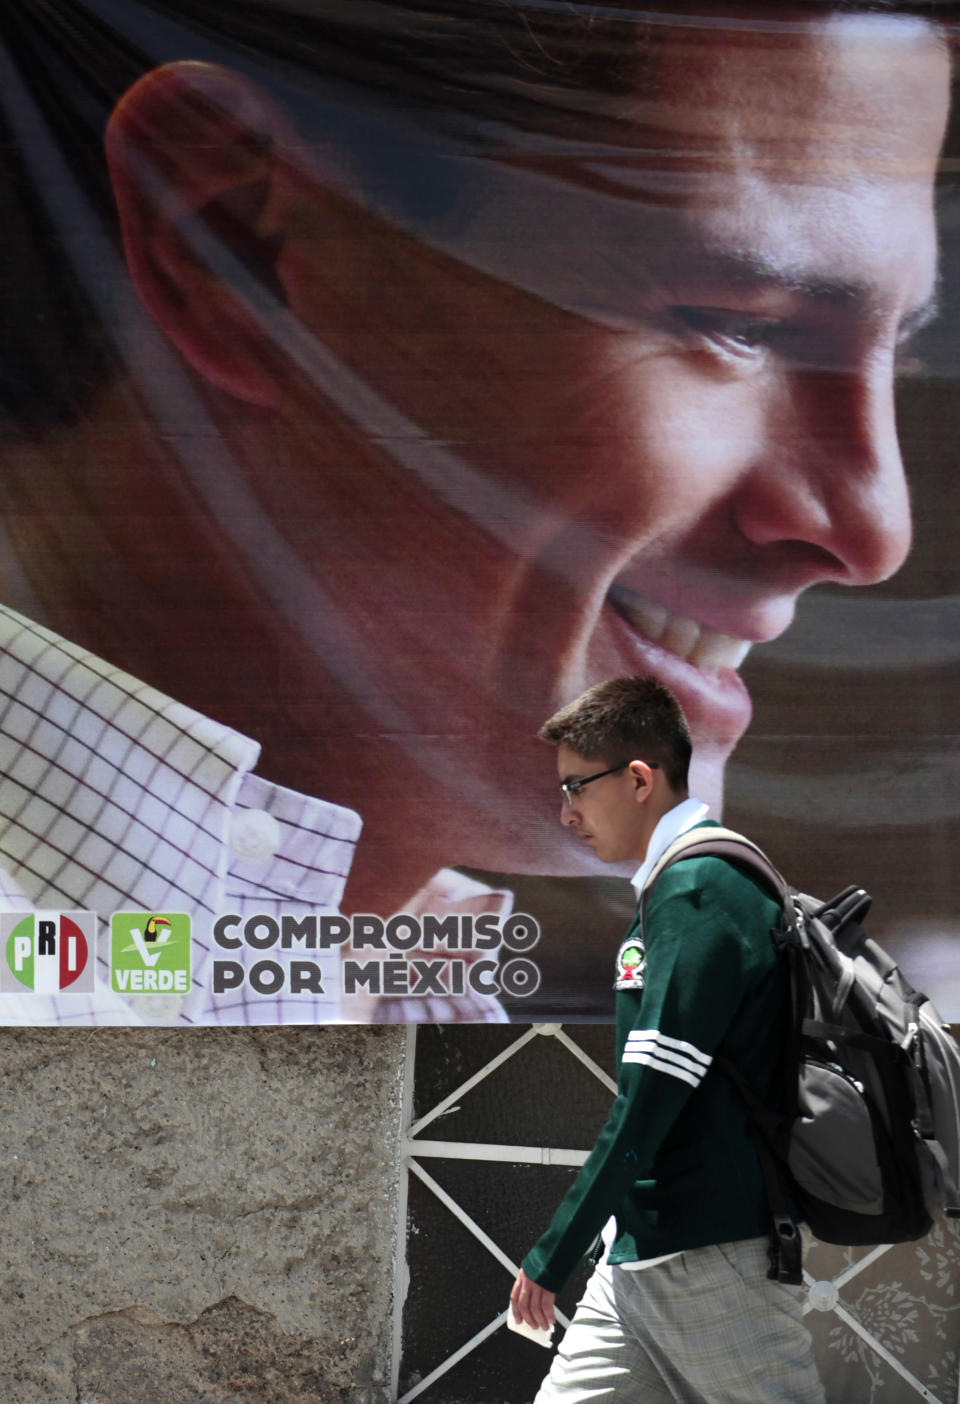 A student walks past an electoral banner with an image of Enrique Pena Nieto, presidential candidate of the opposition Institutional Revolutionary Party, PRI, in Mexico City, Monday, June 25, 2012. General elections in Mexico are scheduled for Sunday, July 1. (AP Photo/Esteban Felix)